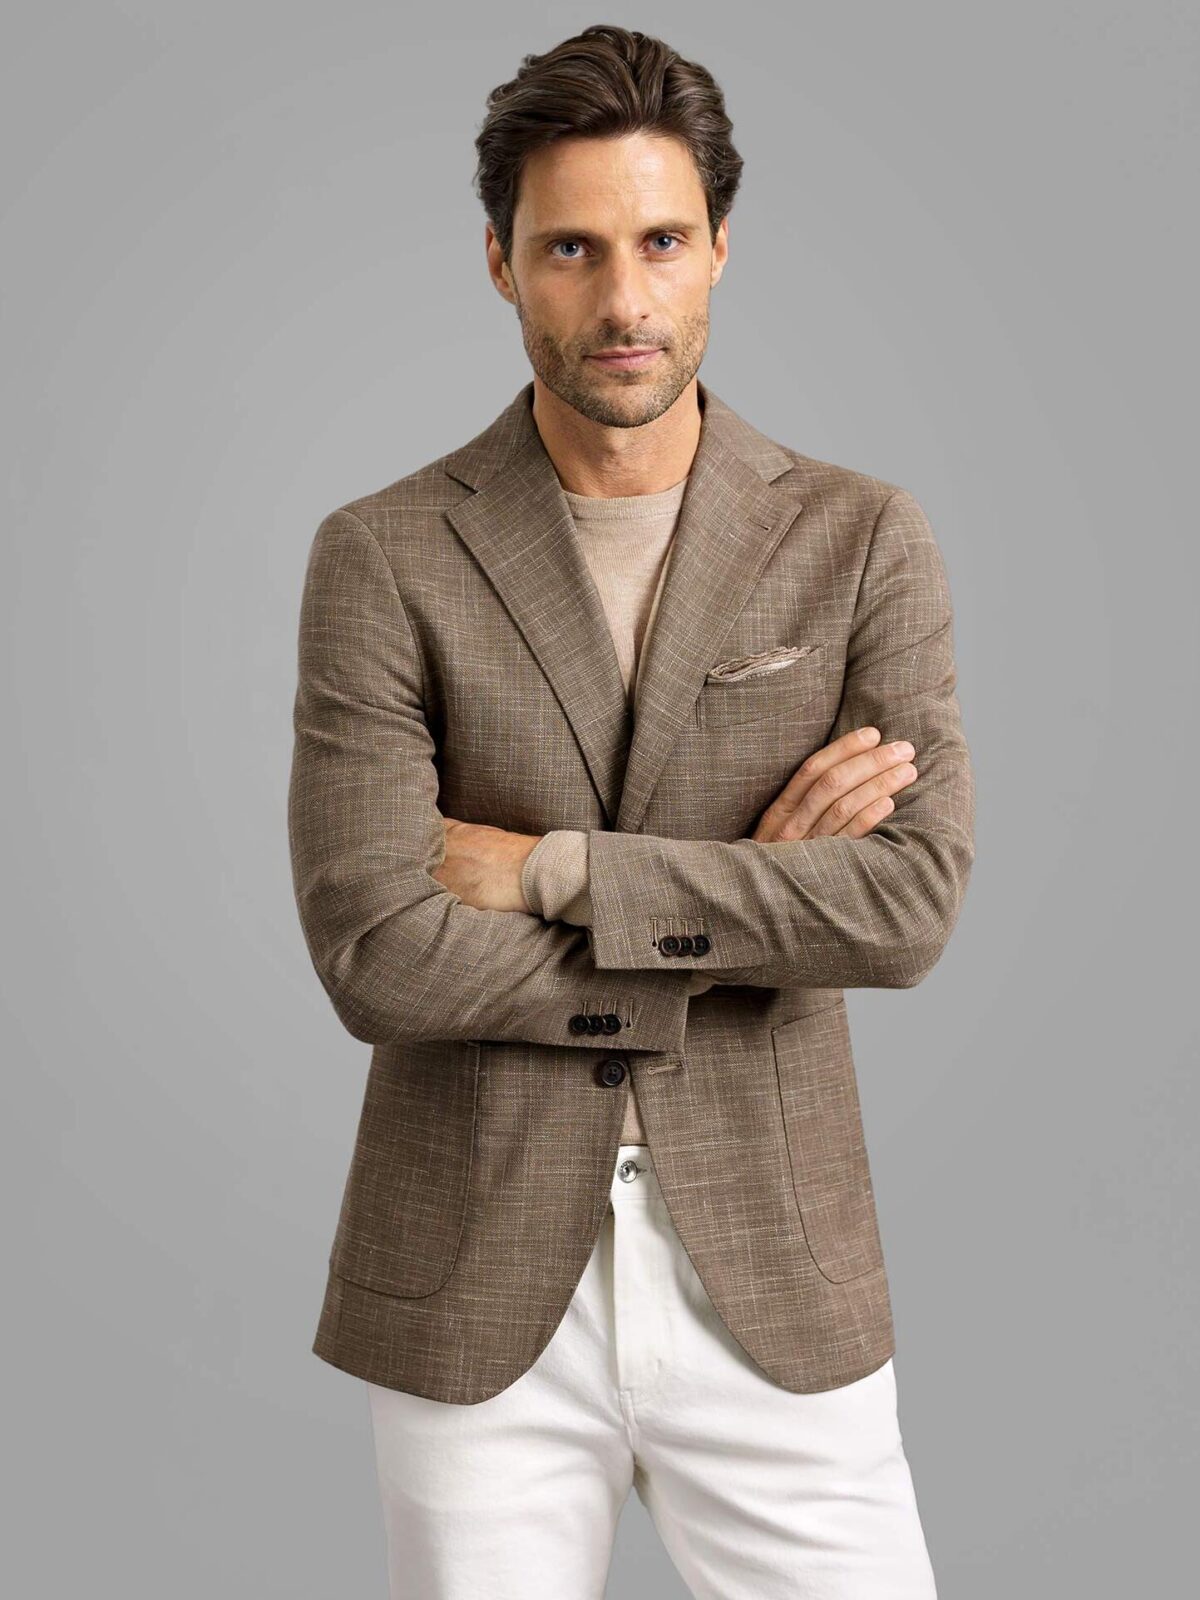 Jacket Custom Mocha - Clothing Tailored Stretch Wool and Linen Fit Bedford